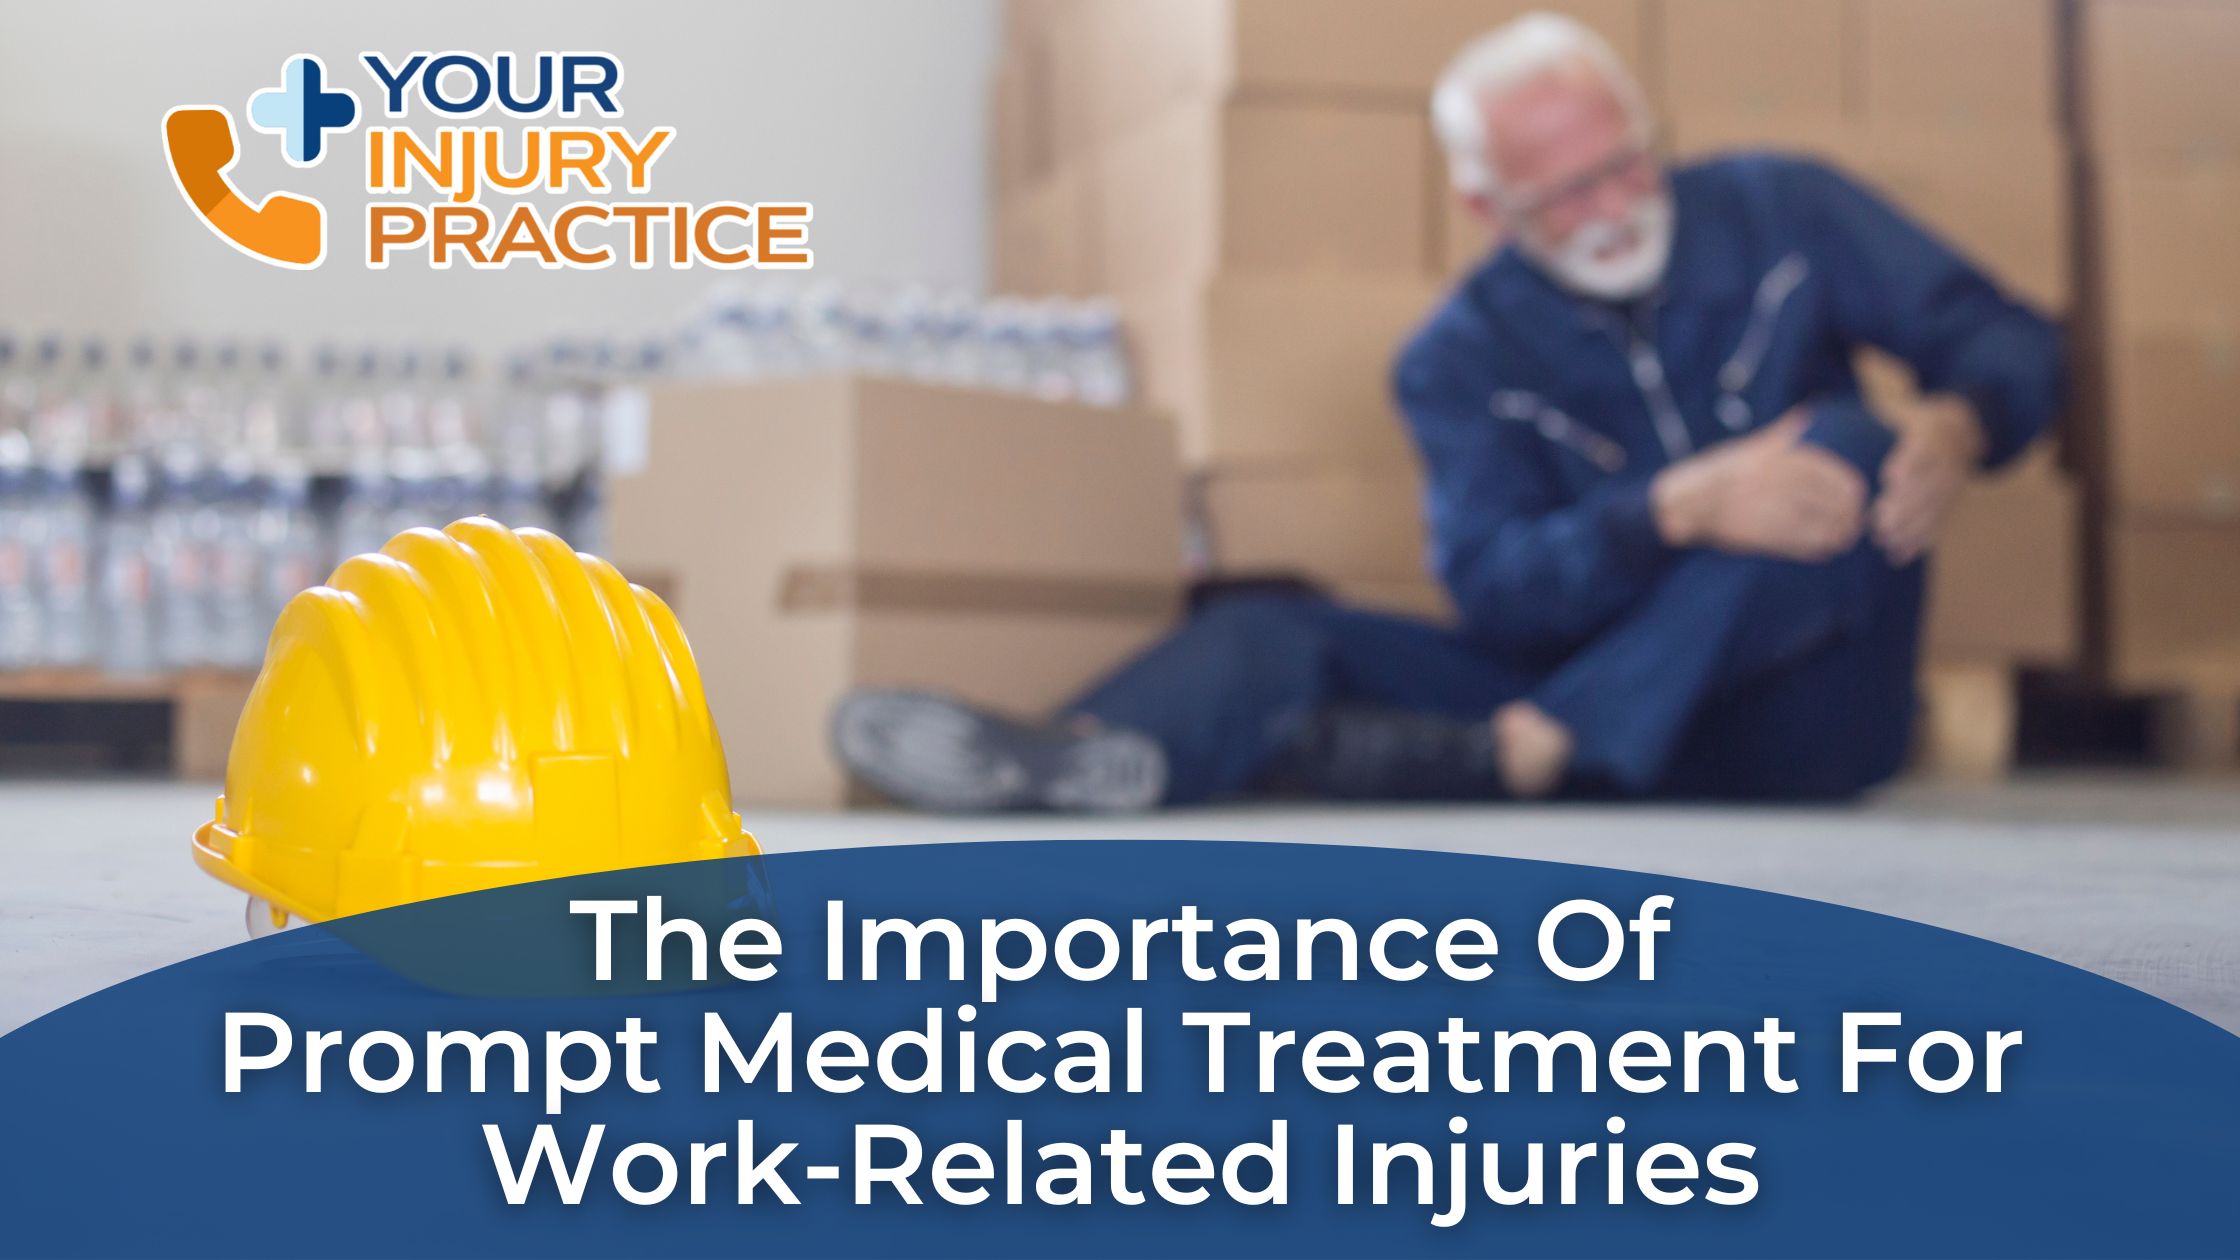 The Importance of Prompt Medical Treatment for Work-Related Injuries